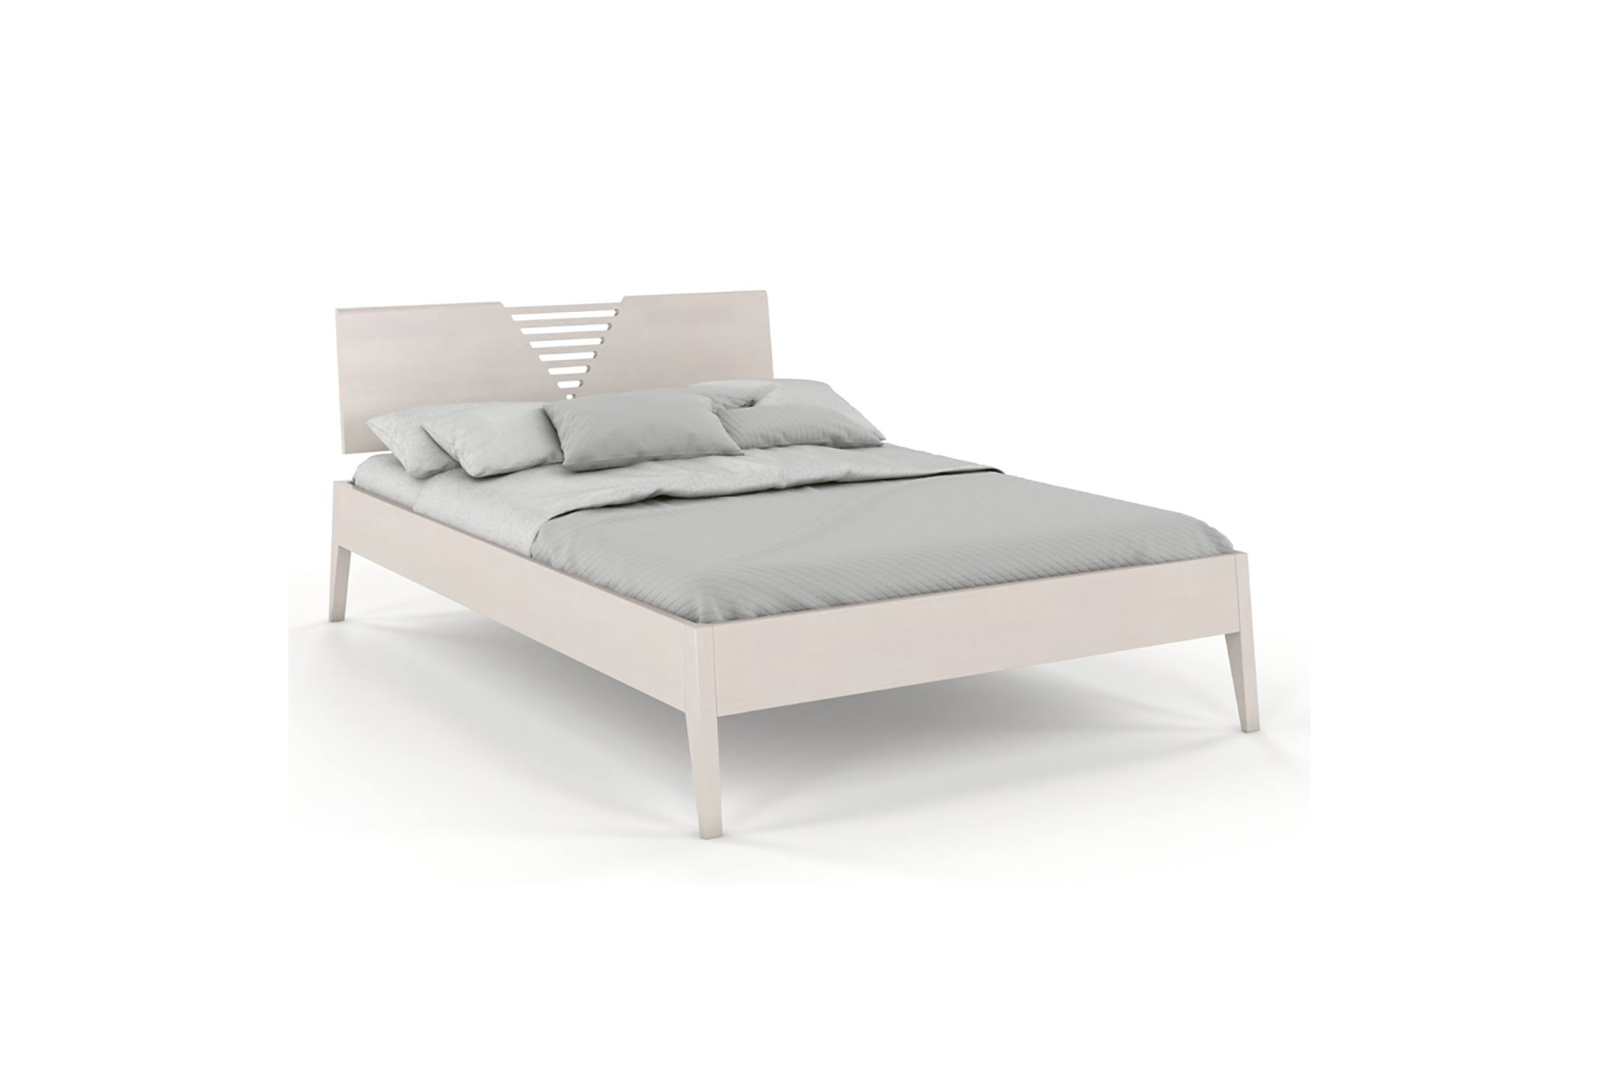 VISBY WOLOMIN WOODEN PINE BED 2